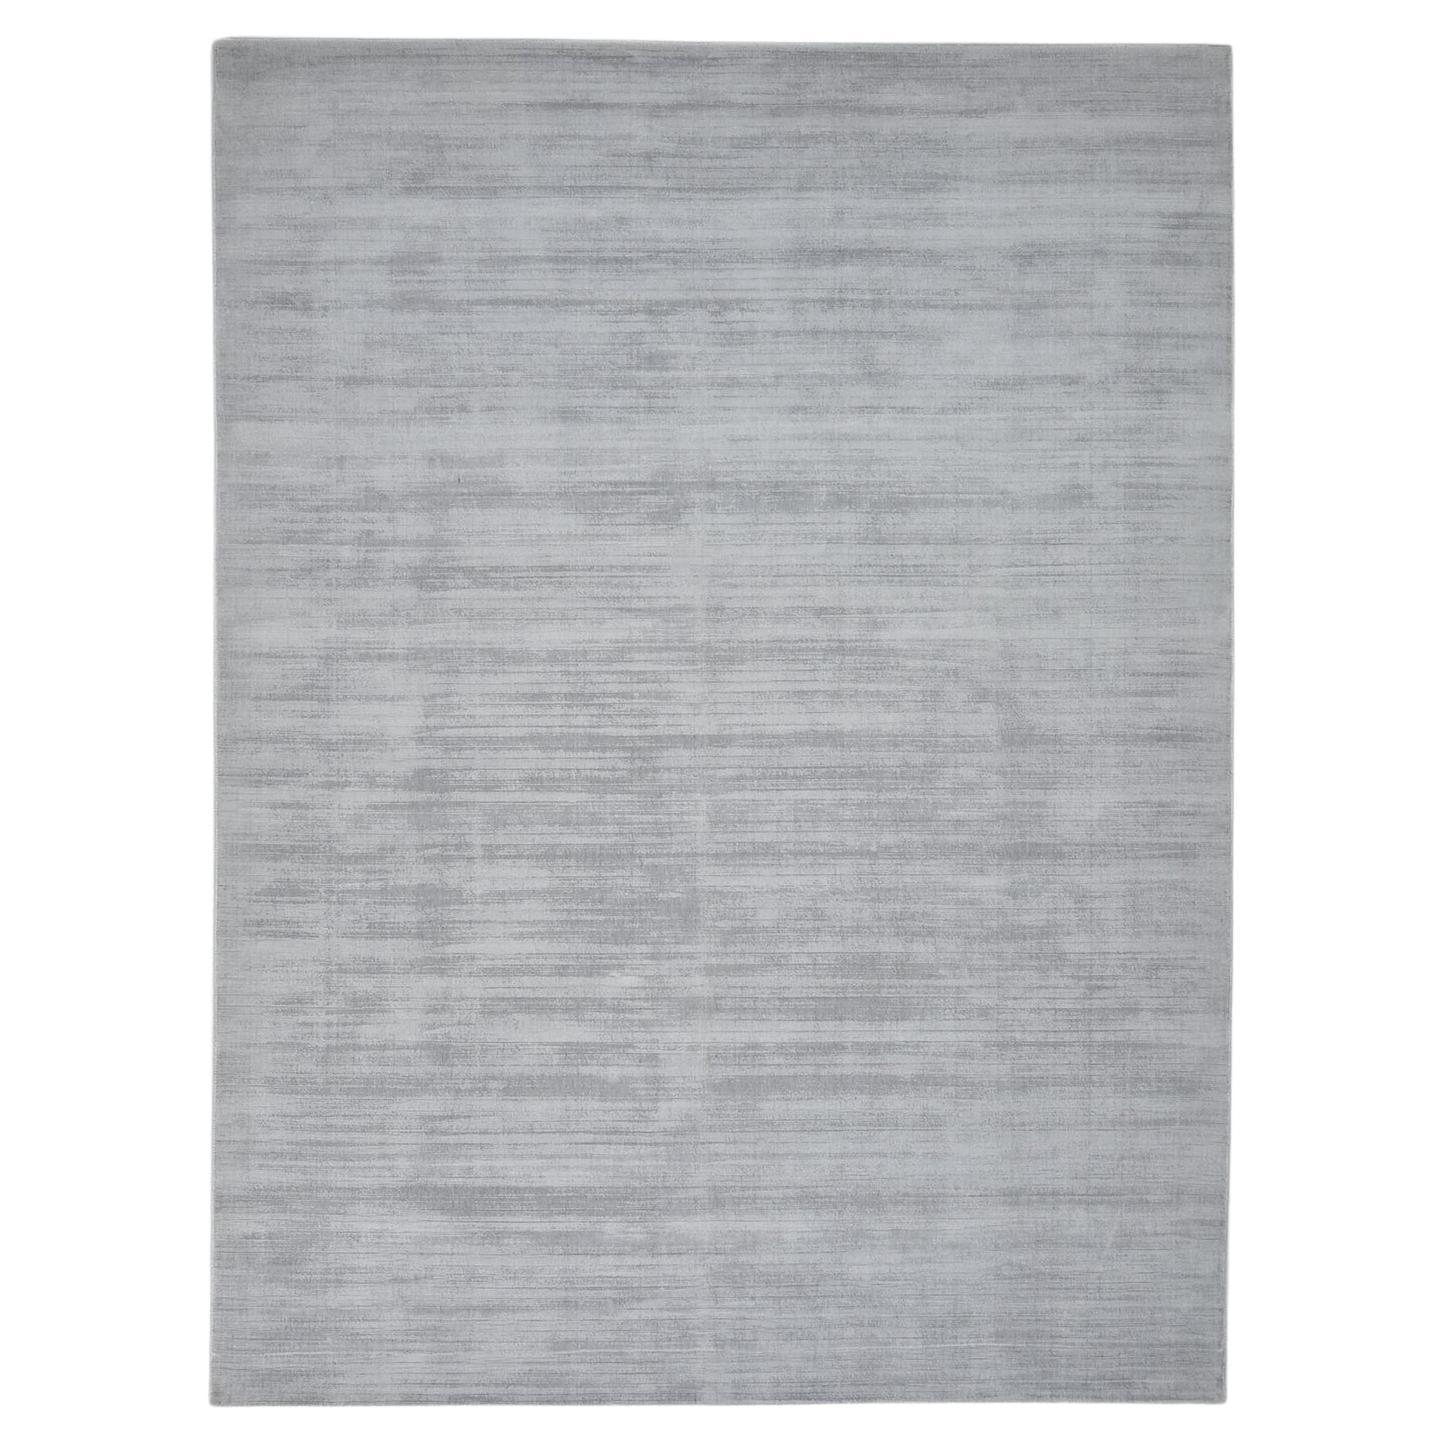 Solo Rugs Solid Modern Hand Loomed Gray Area Rug